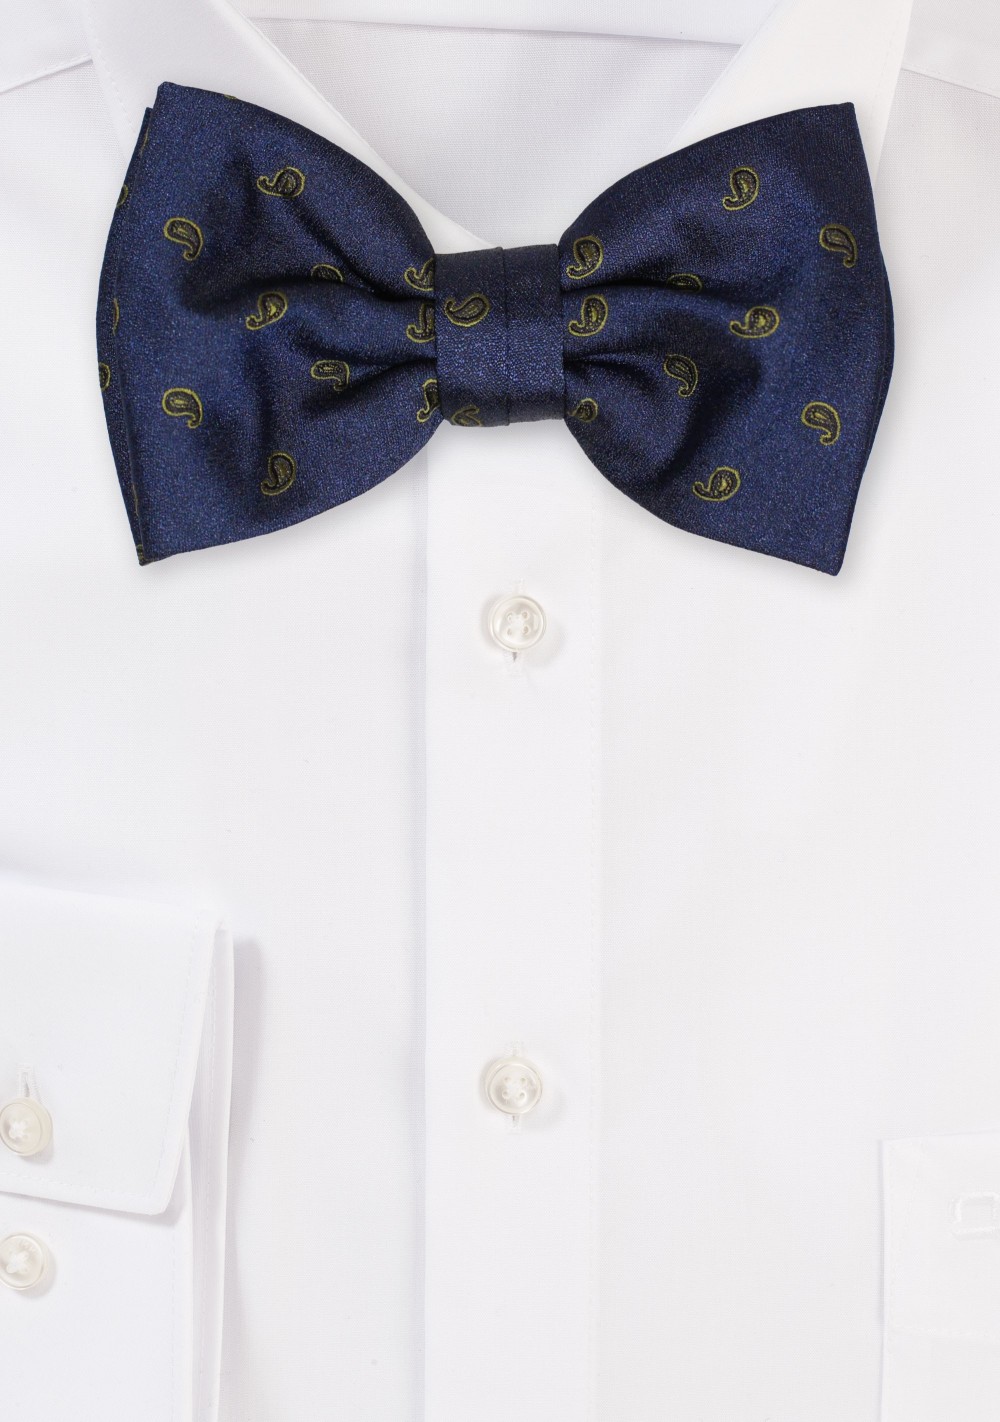 Teal and Oliver Paisley Bow Tie